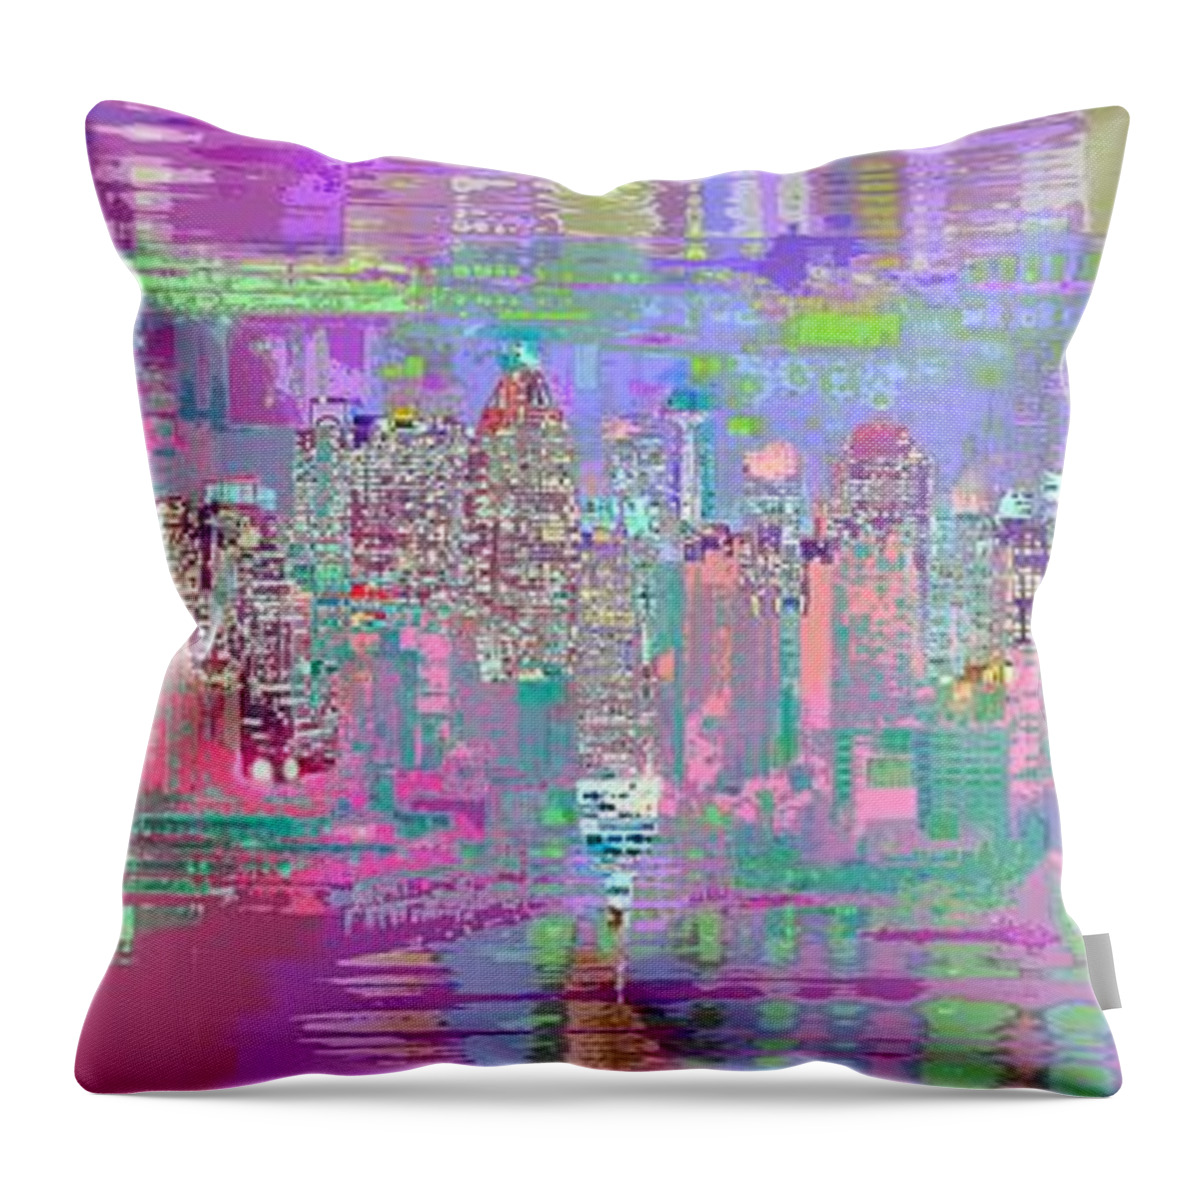 Abstract Throw Pillow featuring the digital art City Blox Light by Mary Clanahan